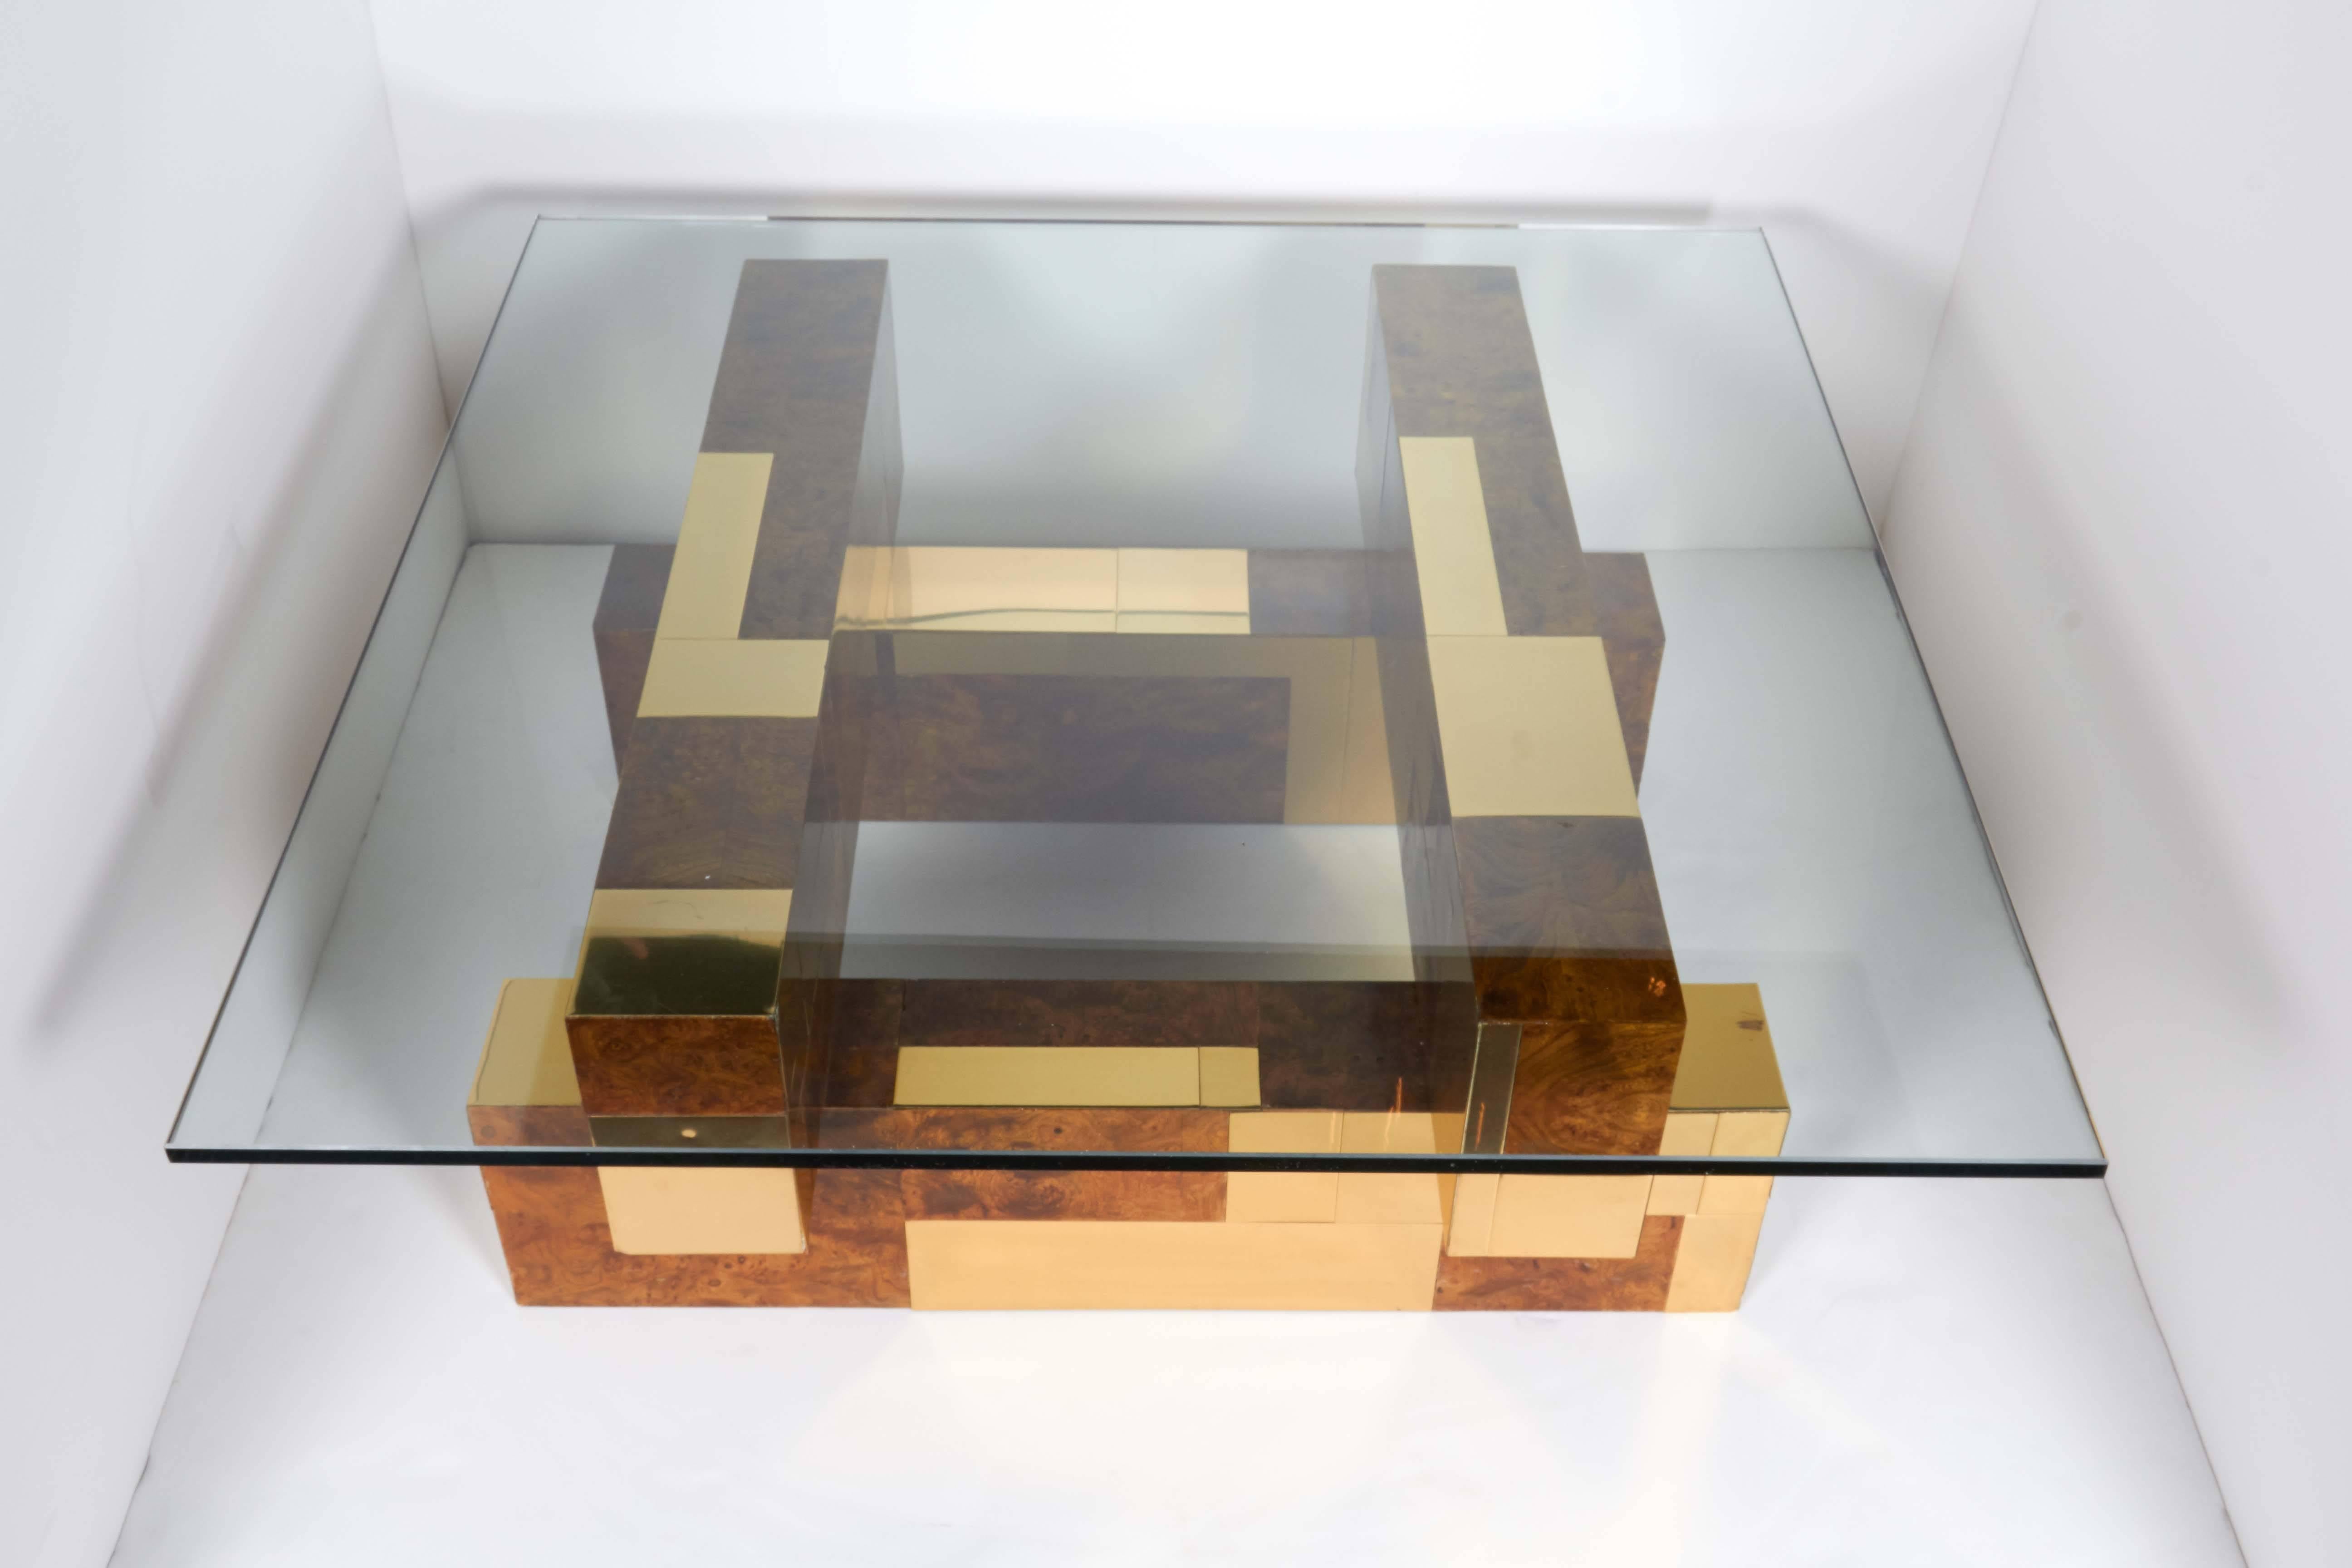 Architectural coffee table from the Cityscape Series by Paul Evans. Cubist form with rare patchwork design in burled wood veneer offset by striking brass insets. Has square glass top with polished edges.